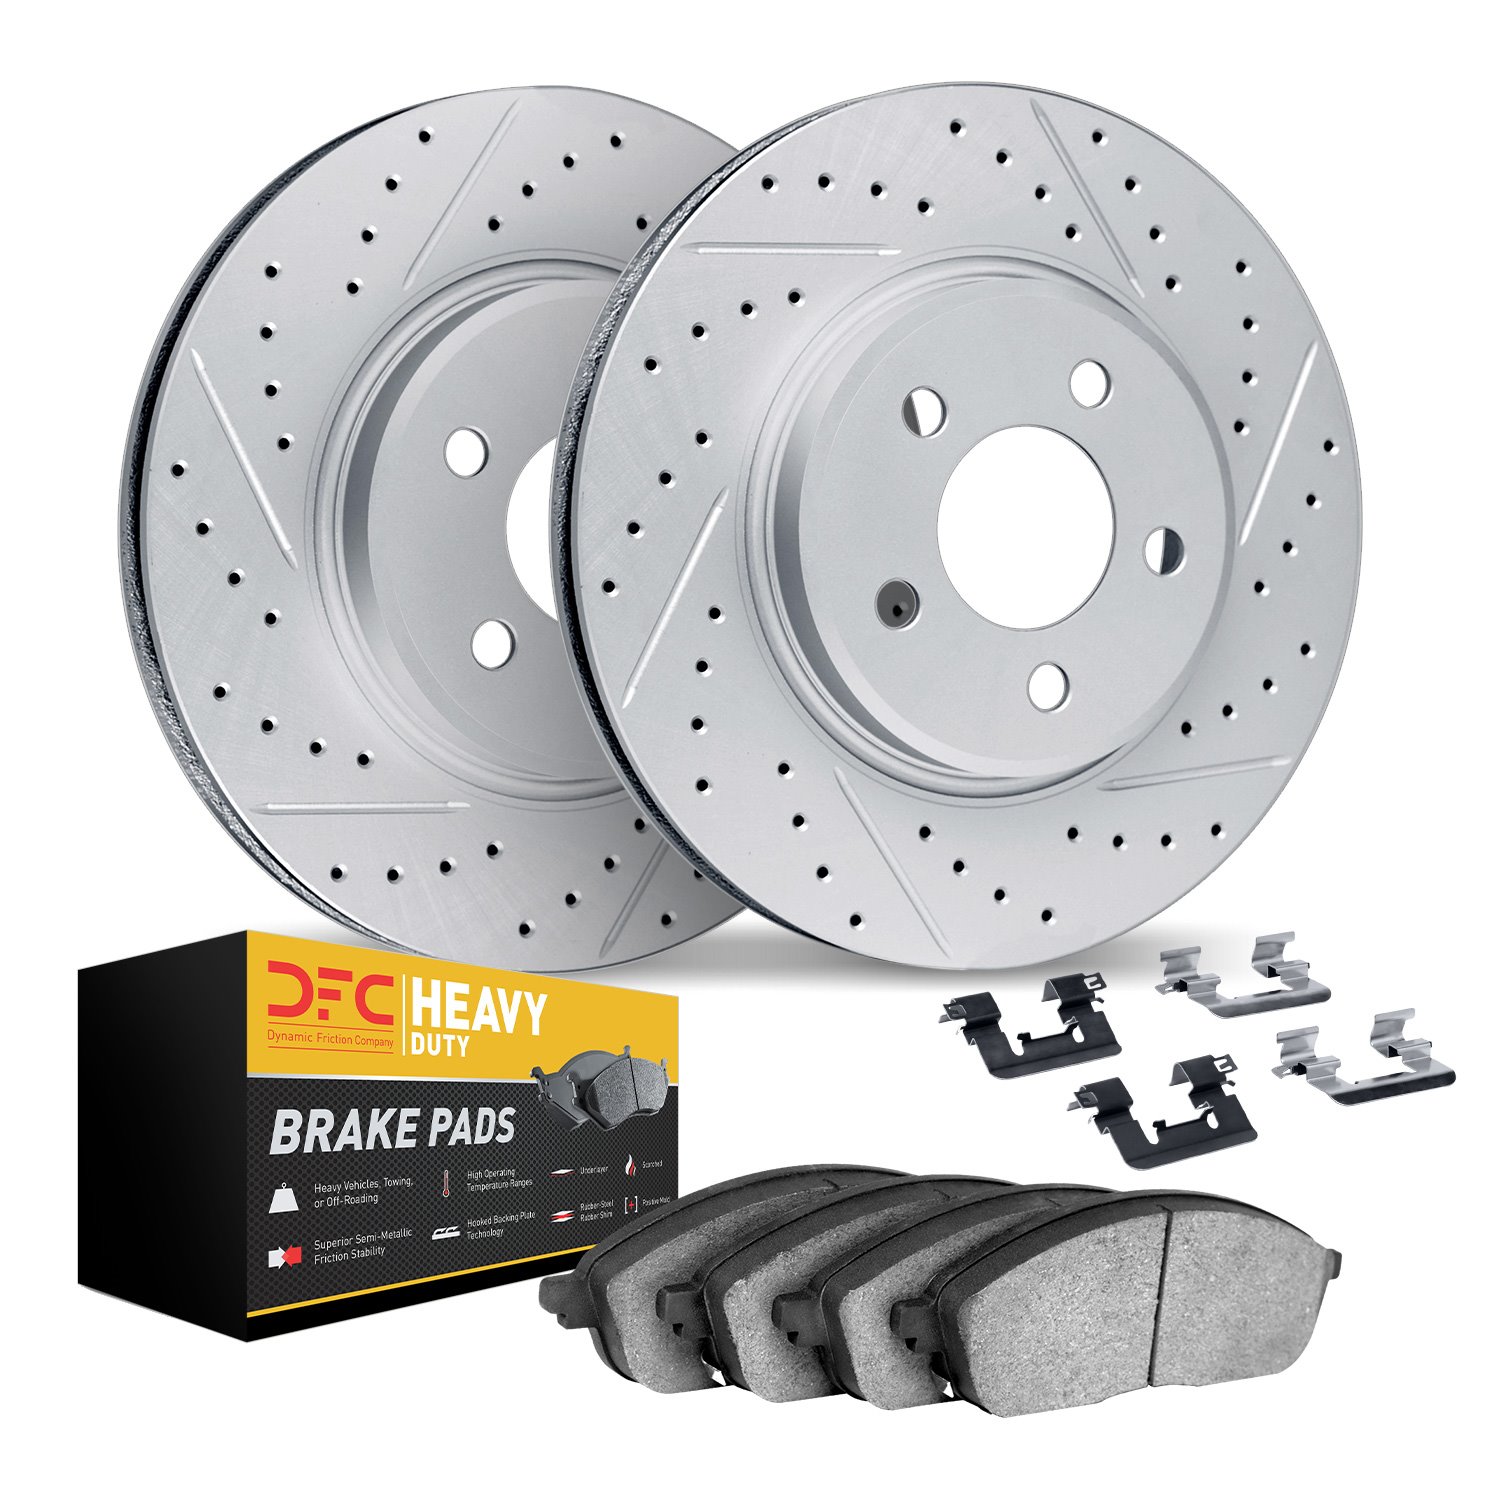 2212-99096 Geoperformance Drilled/Slotted Rotors w/Heavy-Duty Pads Kit & Hardware, 1997-2004 Ford/Lincoln/Mercury/Mazda, Positio